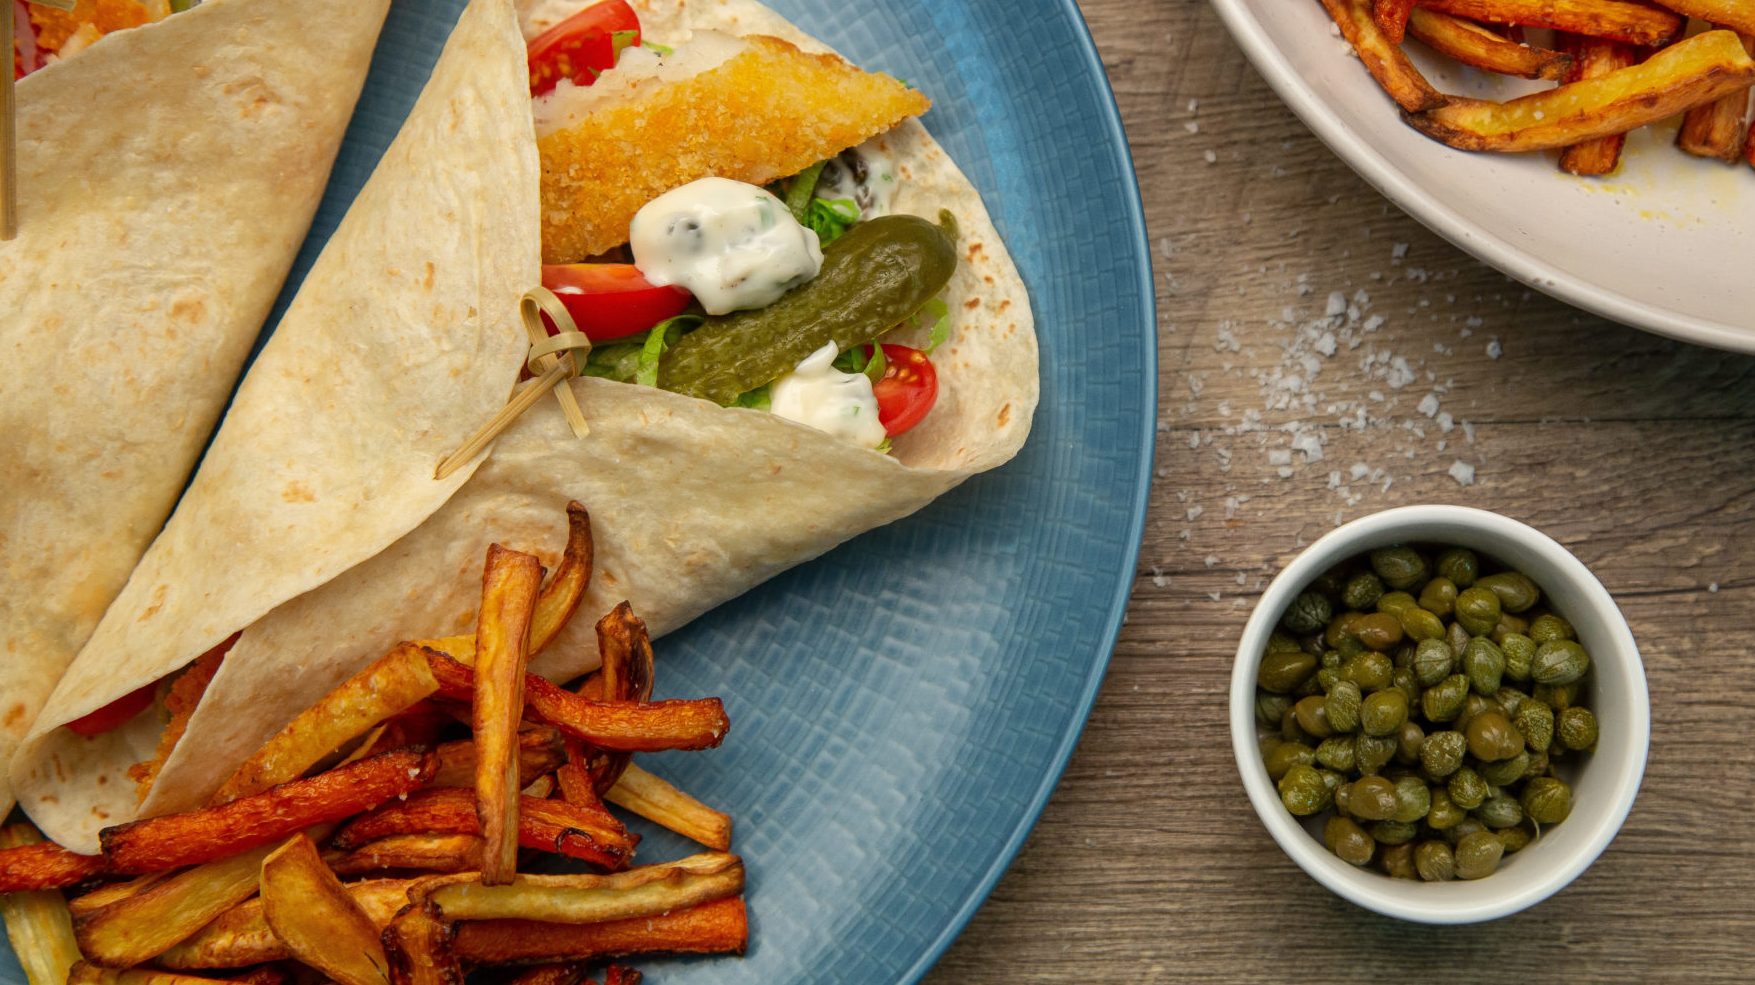 Two wraps filled with brown and red food and white sauce on blue plate with chips, small bowl of capers and a bowl of extra chips.